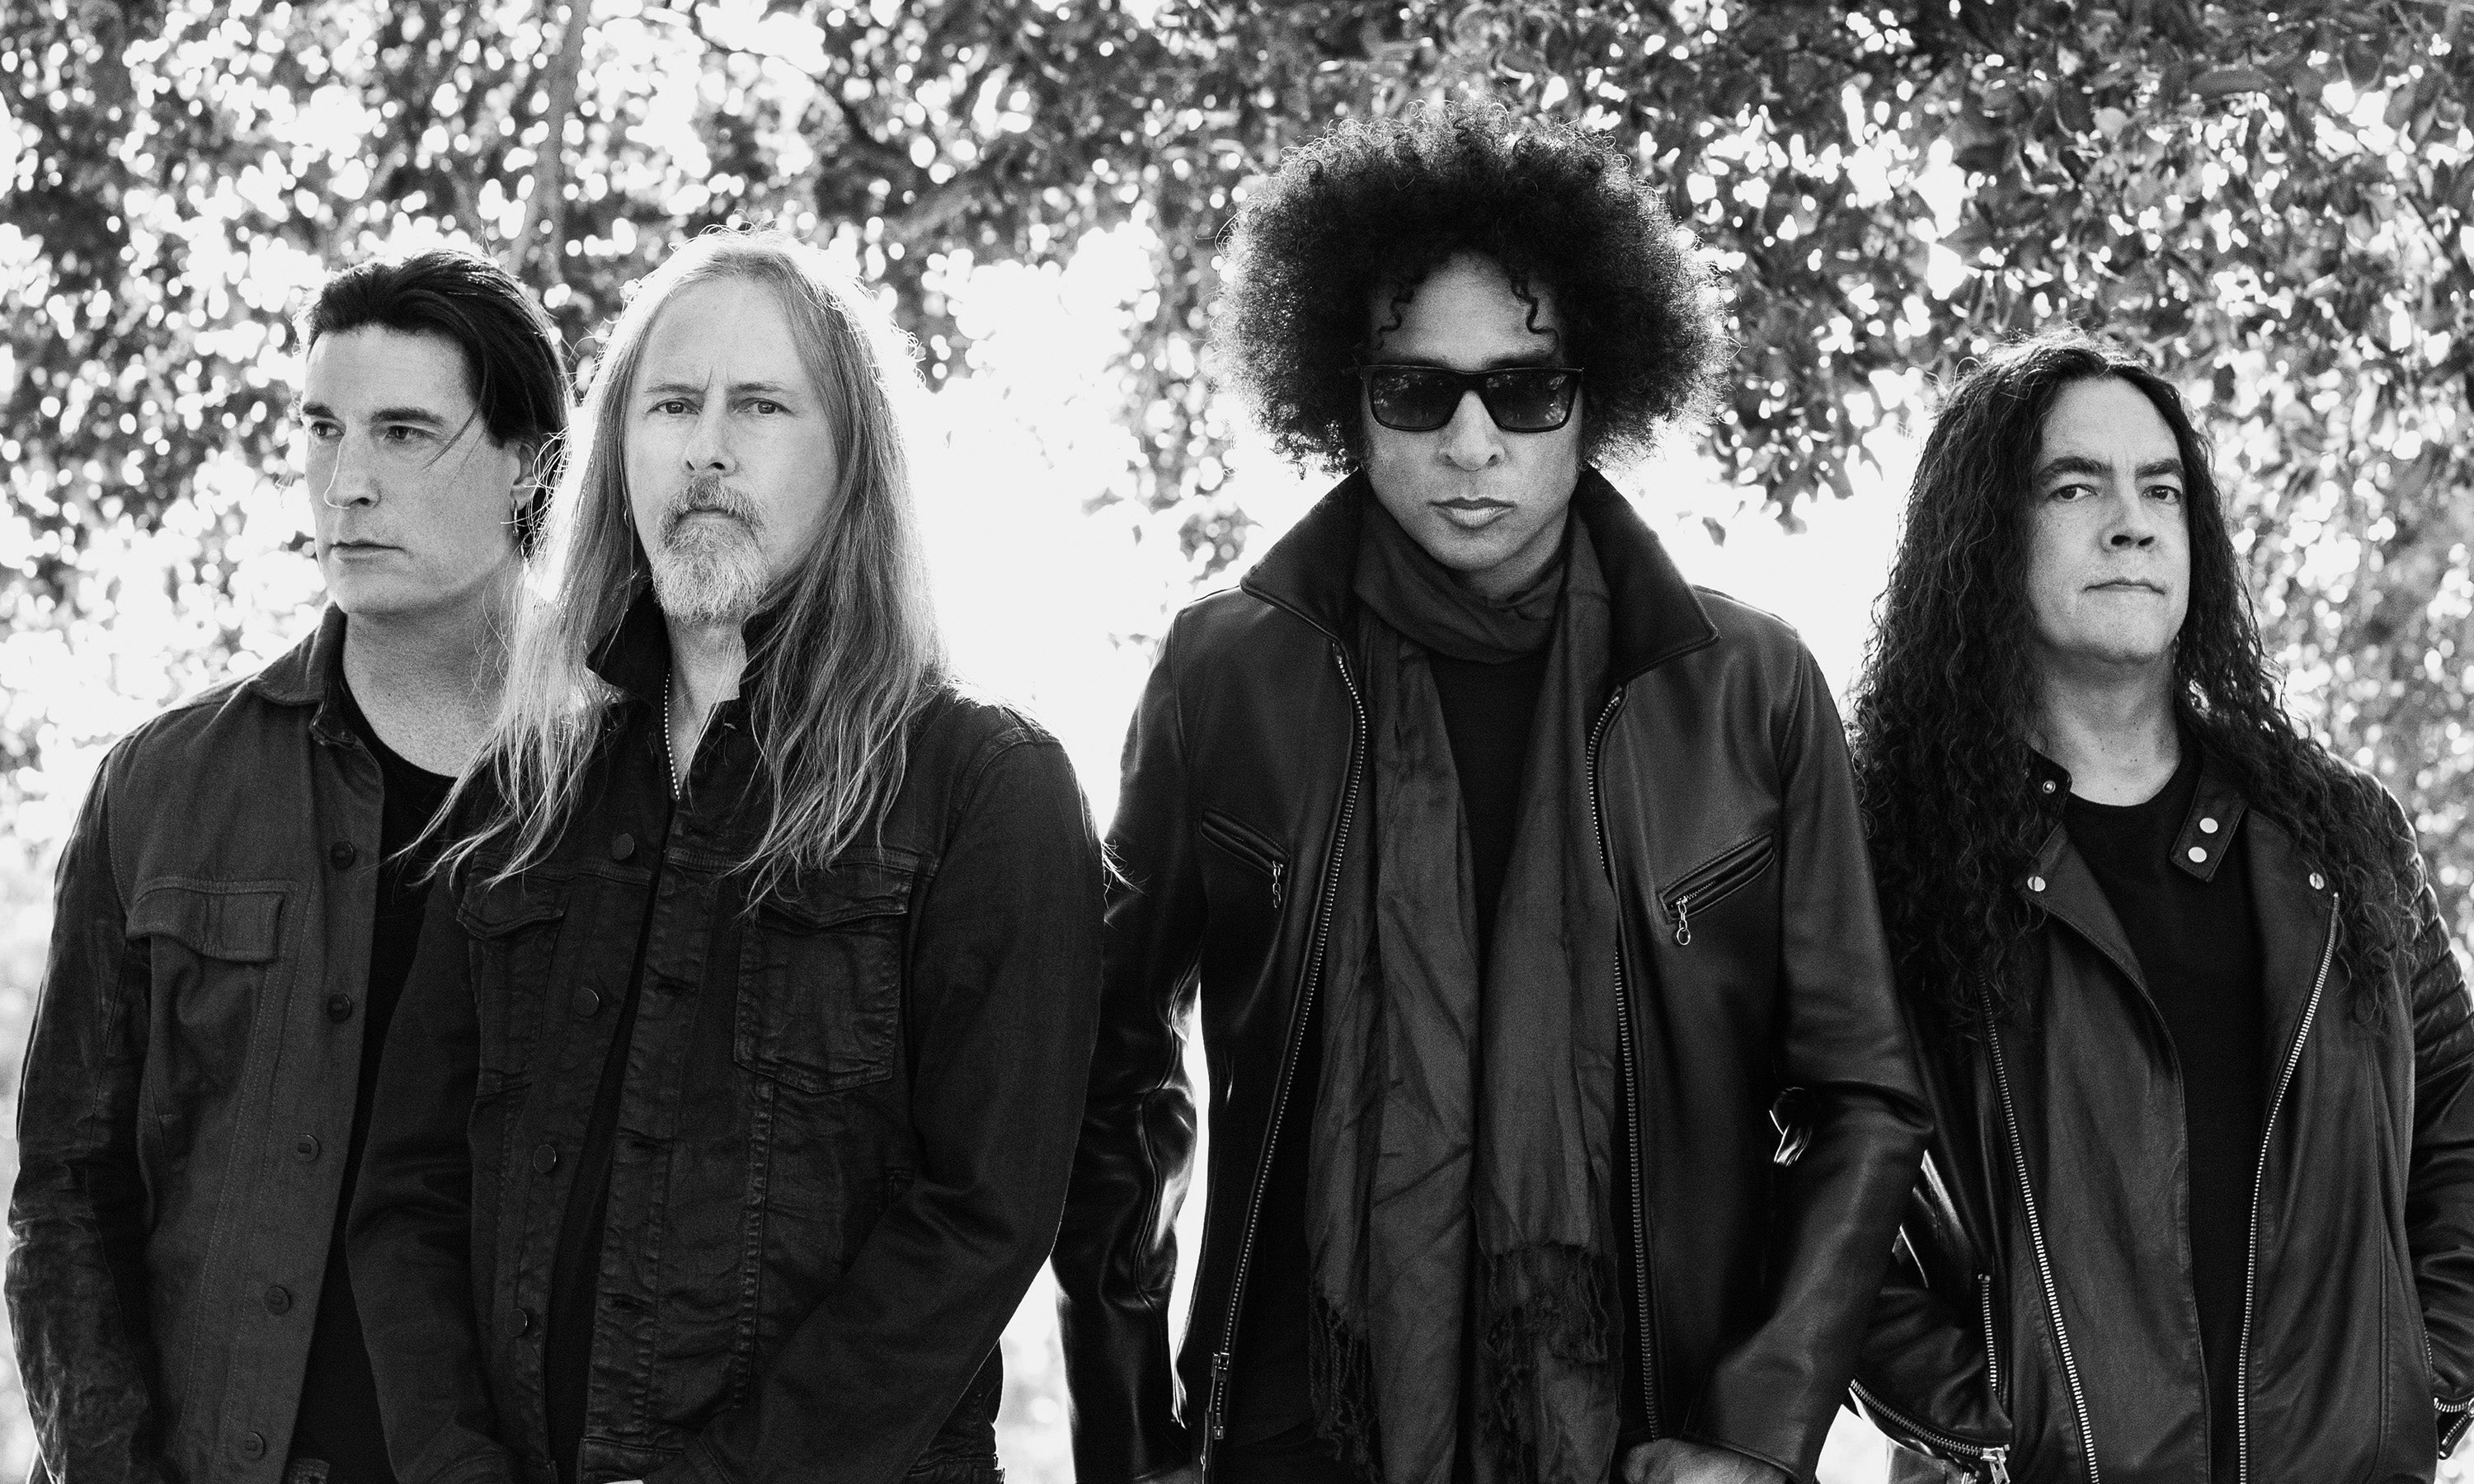 alice in chains tour europe